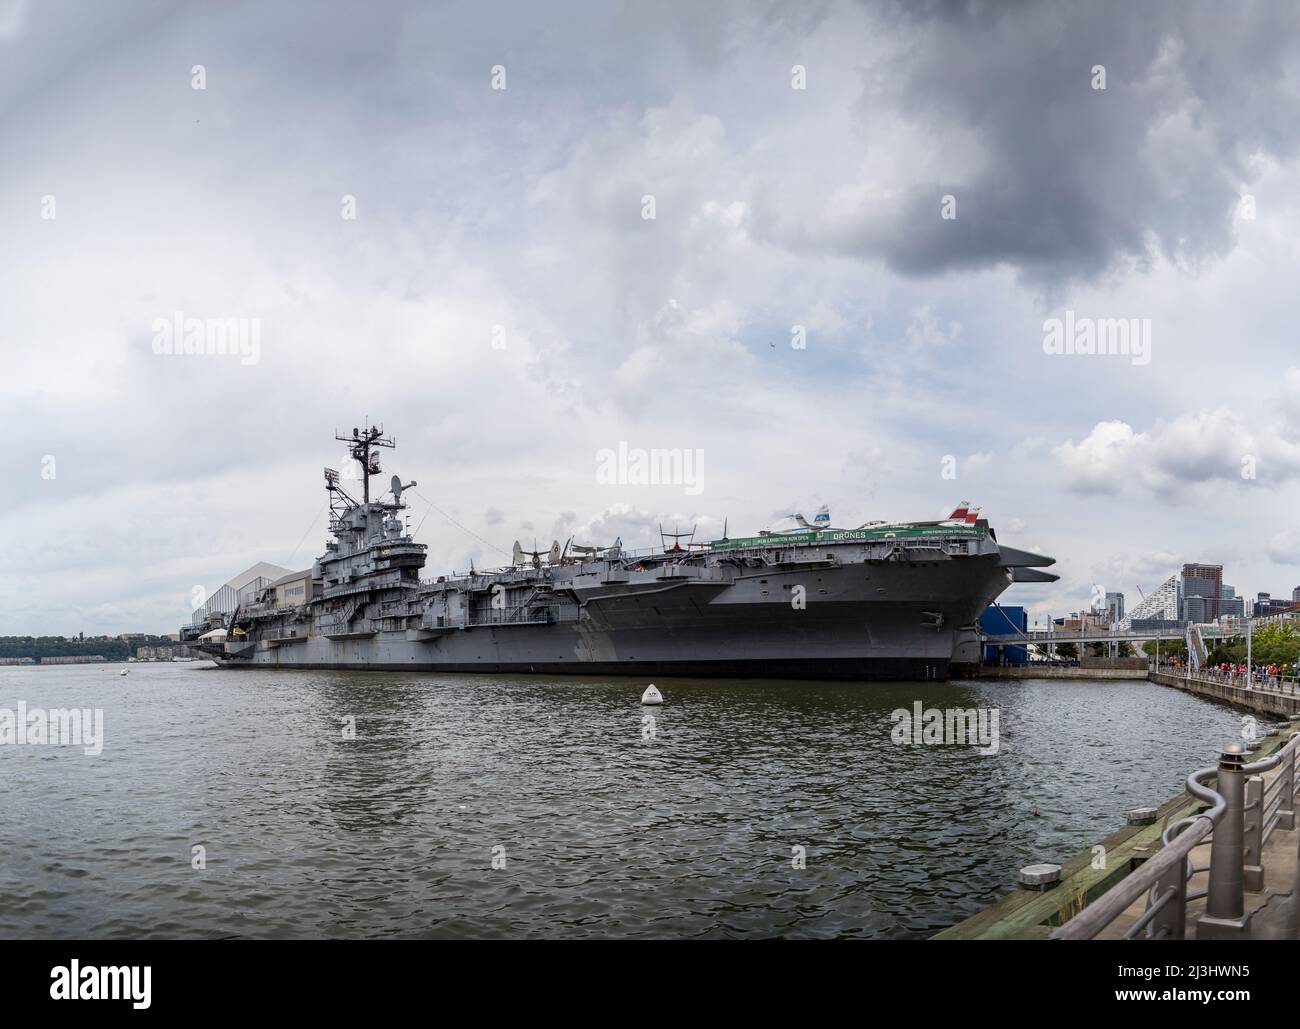 12 Av/W 46 Street, New York City, NY, USA, The Intrepid Sea, Air & Space Museum is an american military and maritime history museum and showcases the aircraft carrier USS Intrepid. Stock Photo